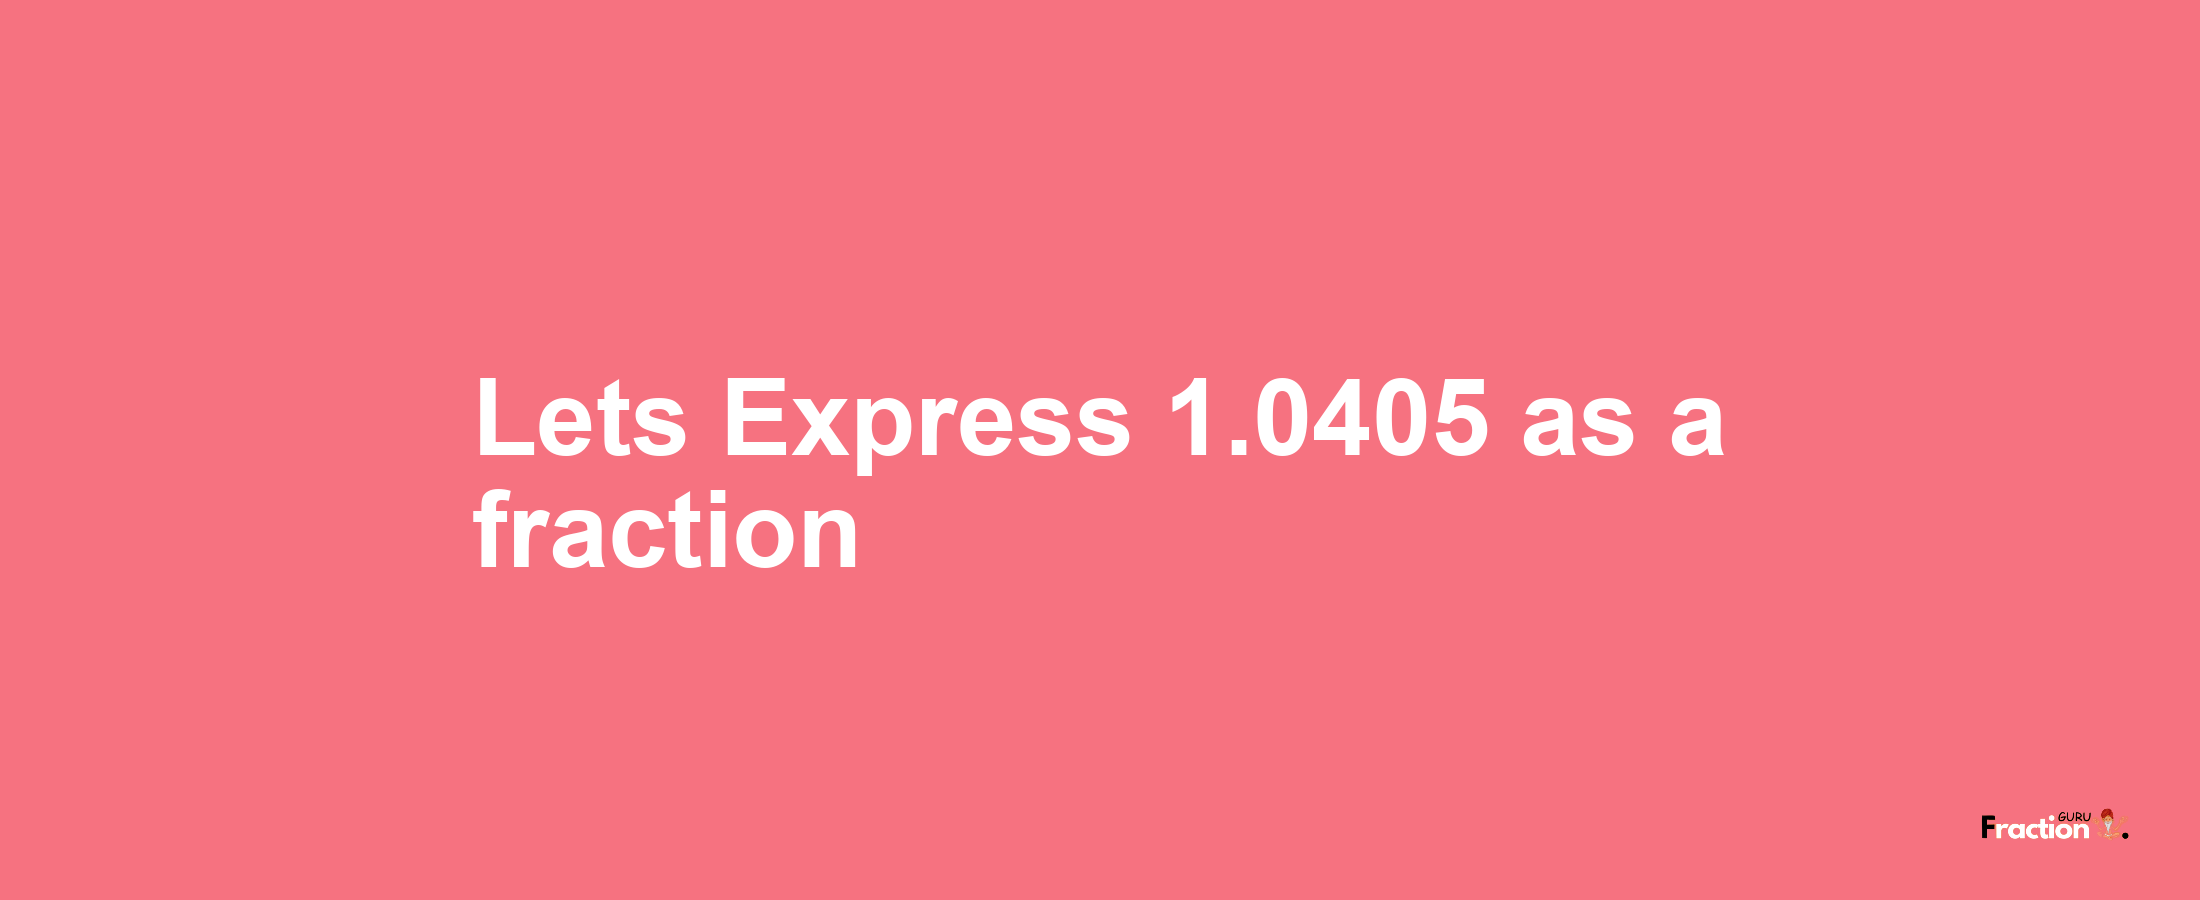 Lets Express 1.0405 as afraction